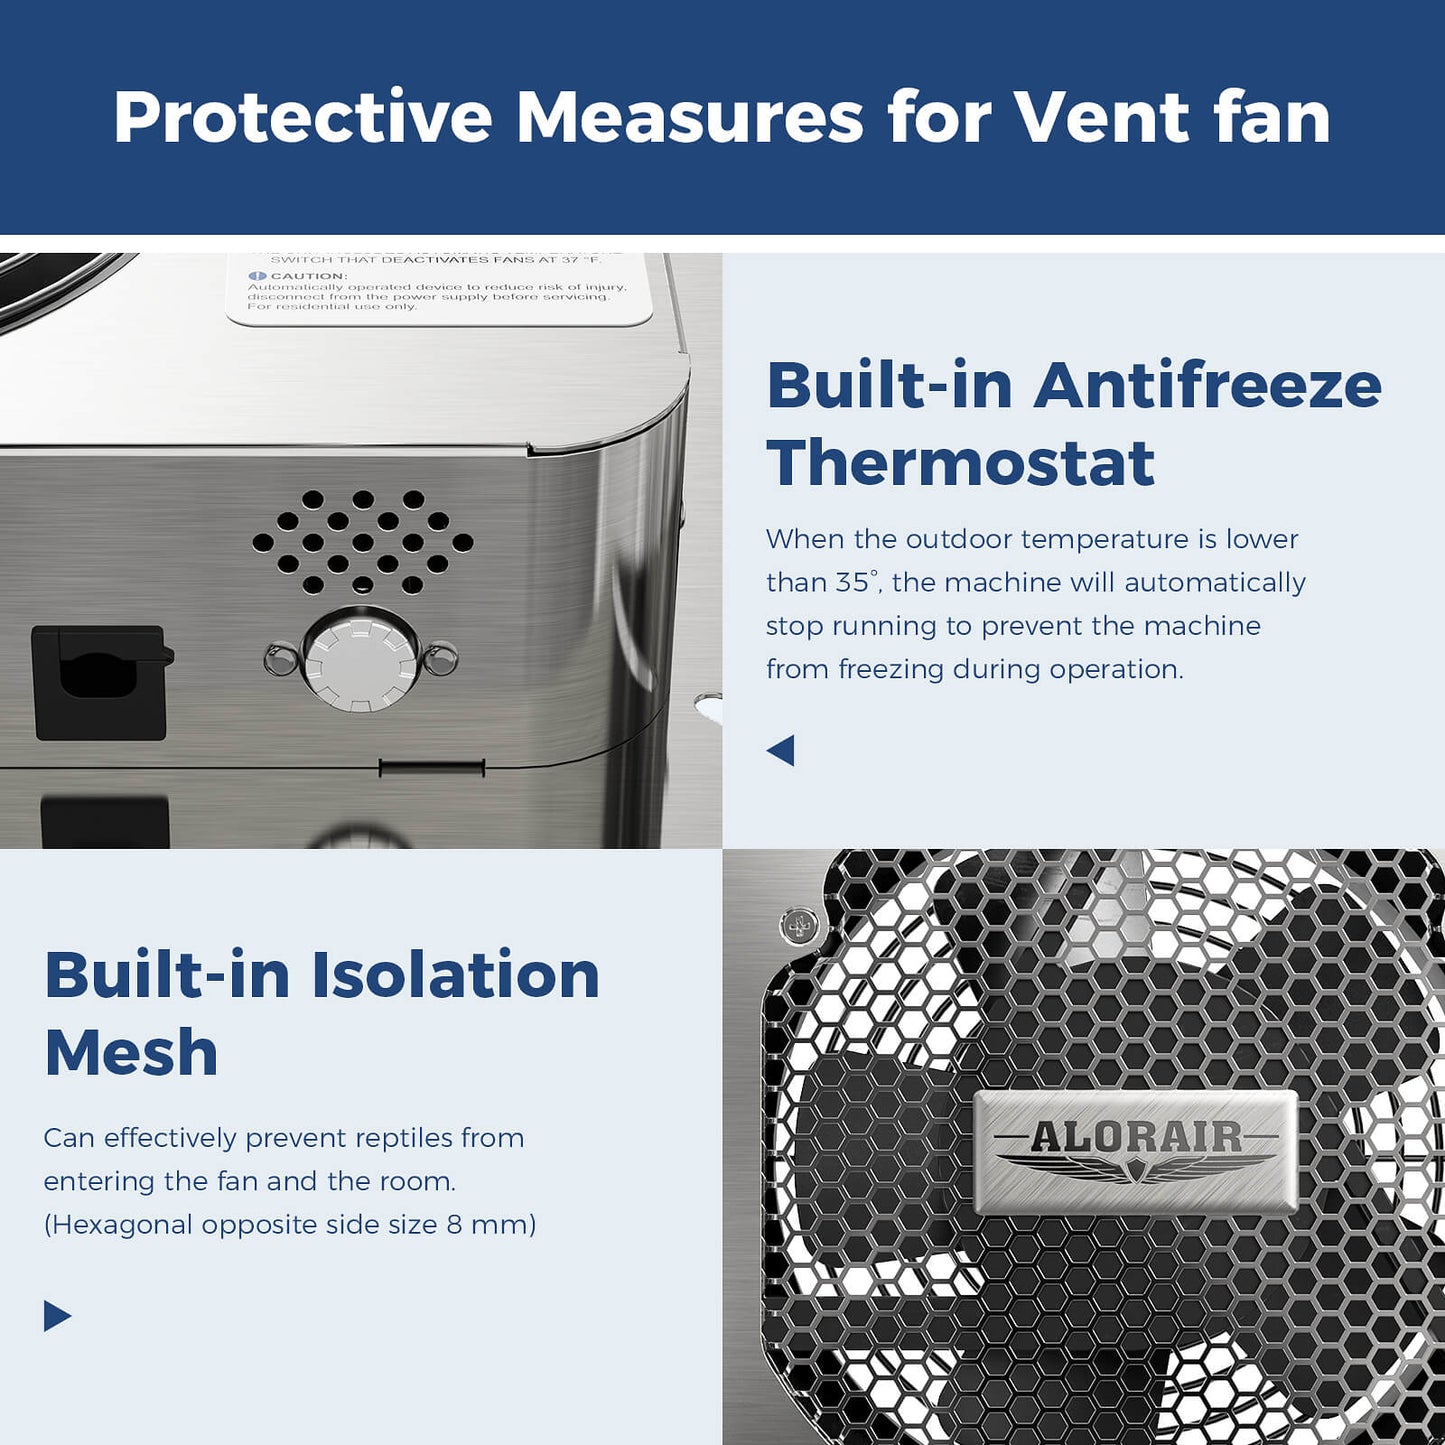 AlorAir 300CFM Stainless Steel Crawl Space Fan IP55 Rated Crawl Space Ventilation Fan with Thermostat, Built-In Isolation Net 6.7 Inch Foundation Vent Fan for Crawl Space, Basement, Garage, Attic AlorAir